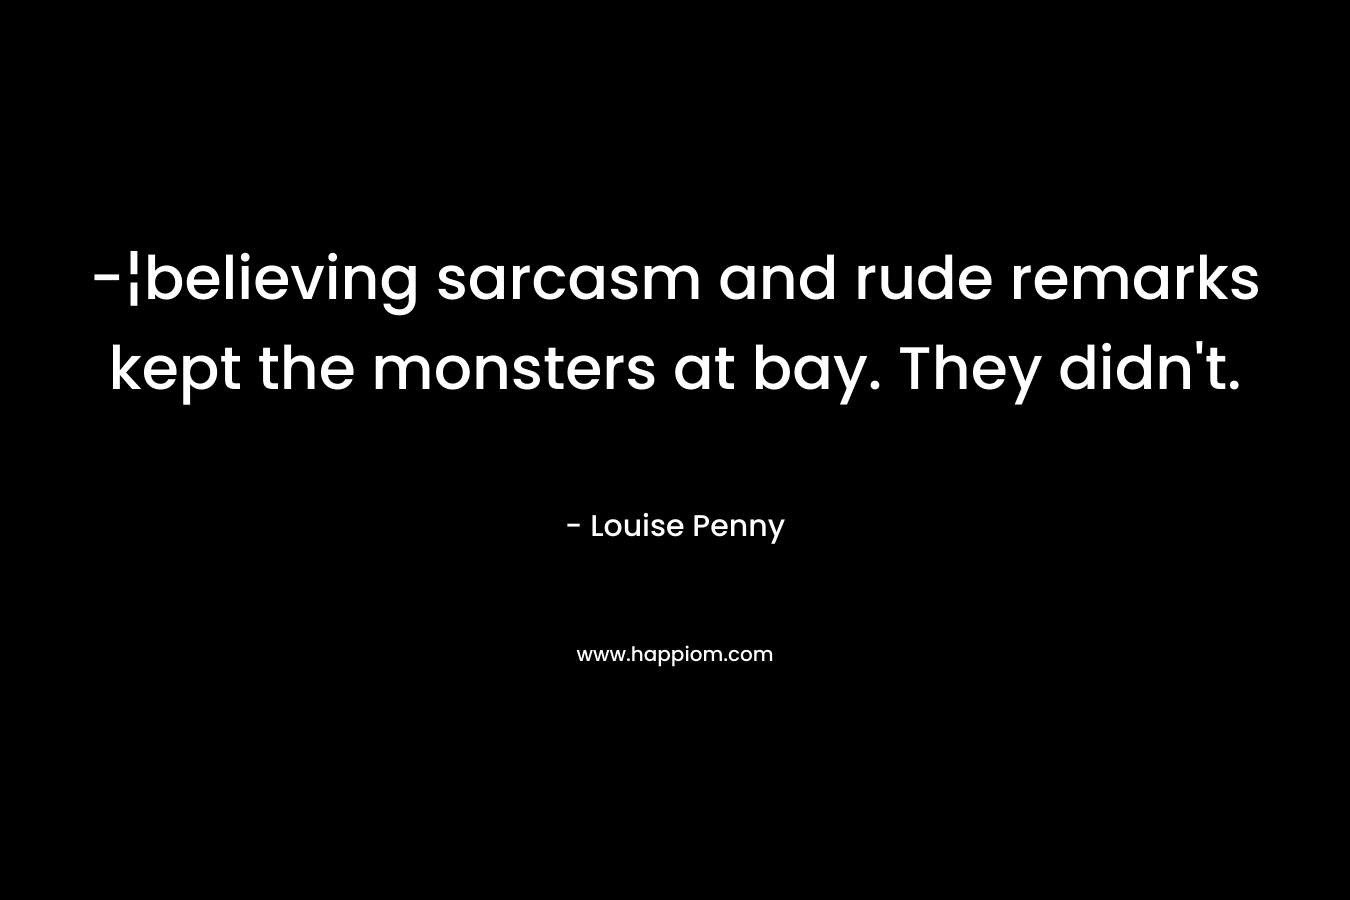 -¦believing sarcasm and rude remarks kept the monsters at bay. They didn't.